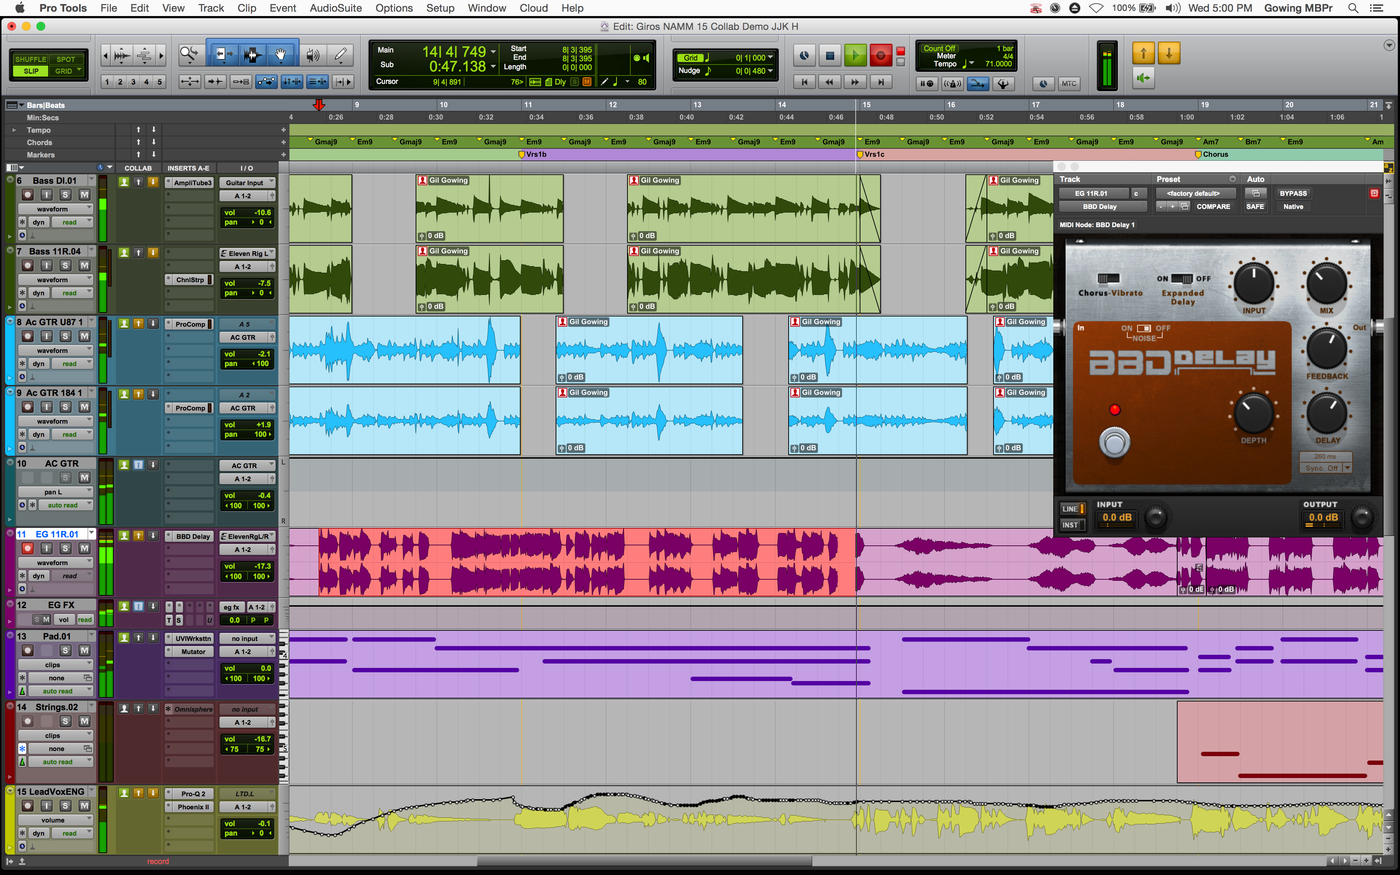 Avid Pro Tools Annual Plug-ins and Support Plan for Pro Tools 12 (Renewal)